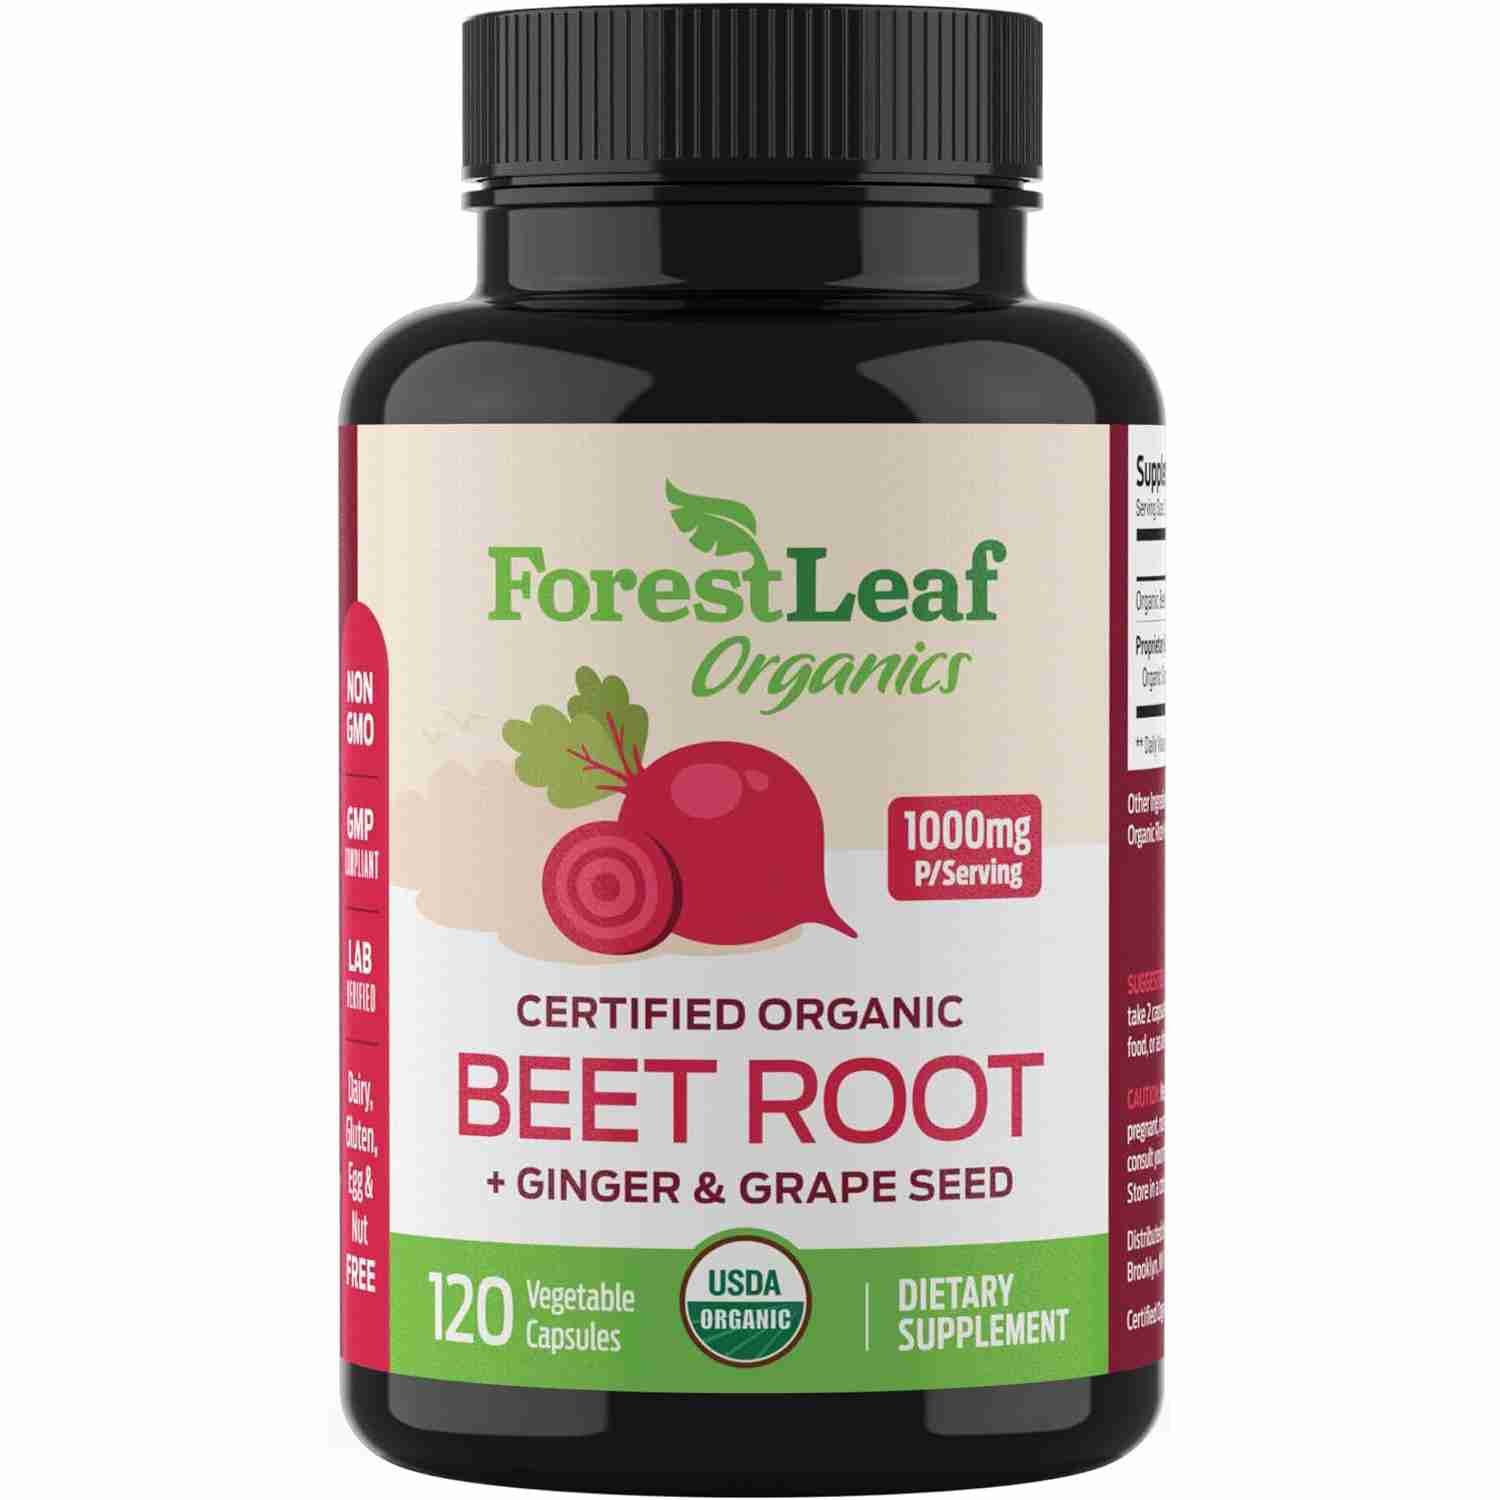 beet-root with cash back rebate